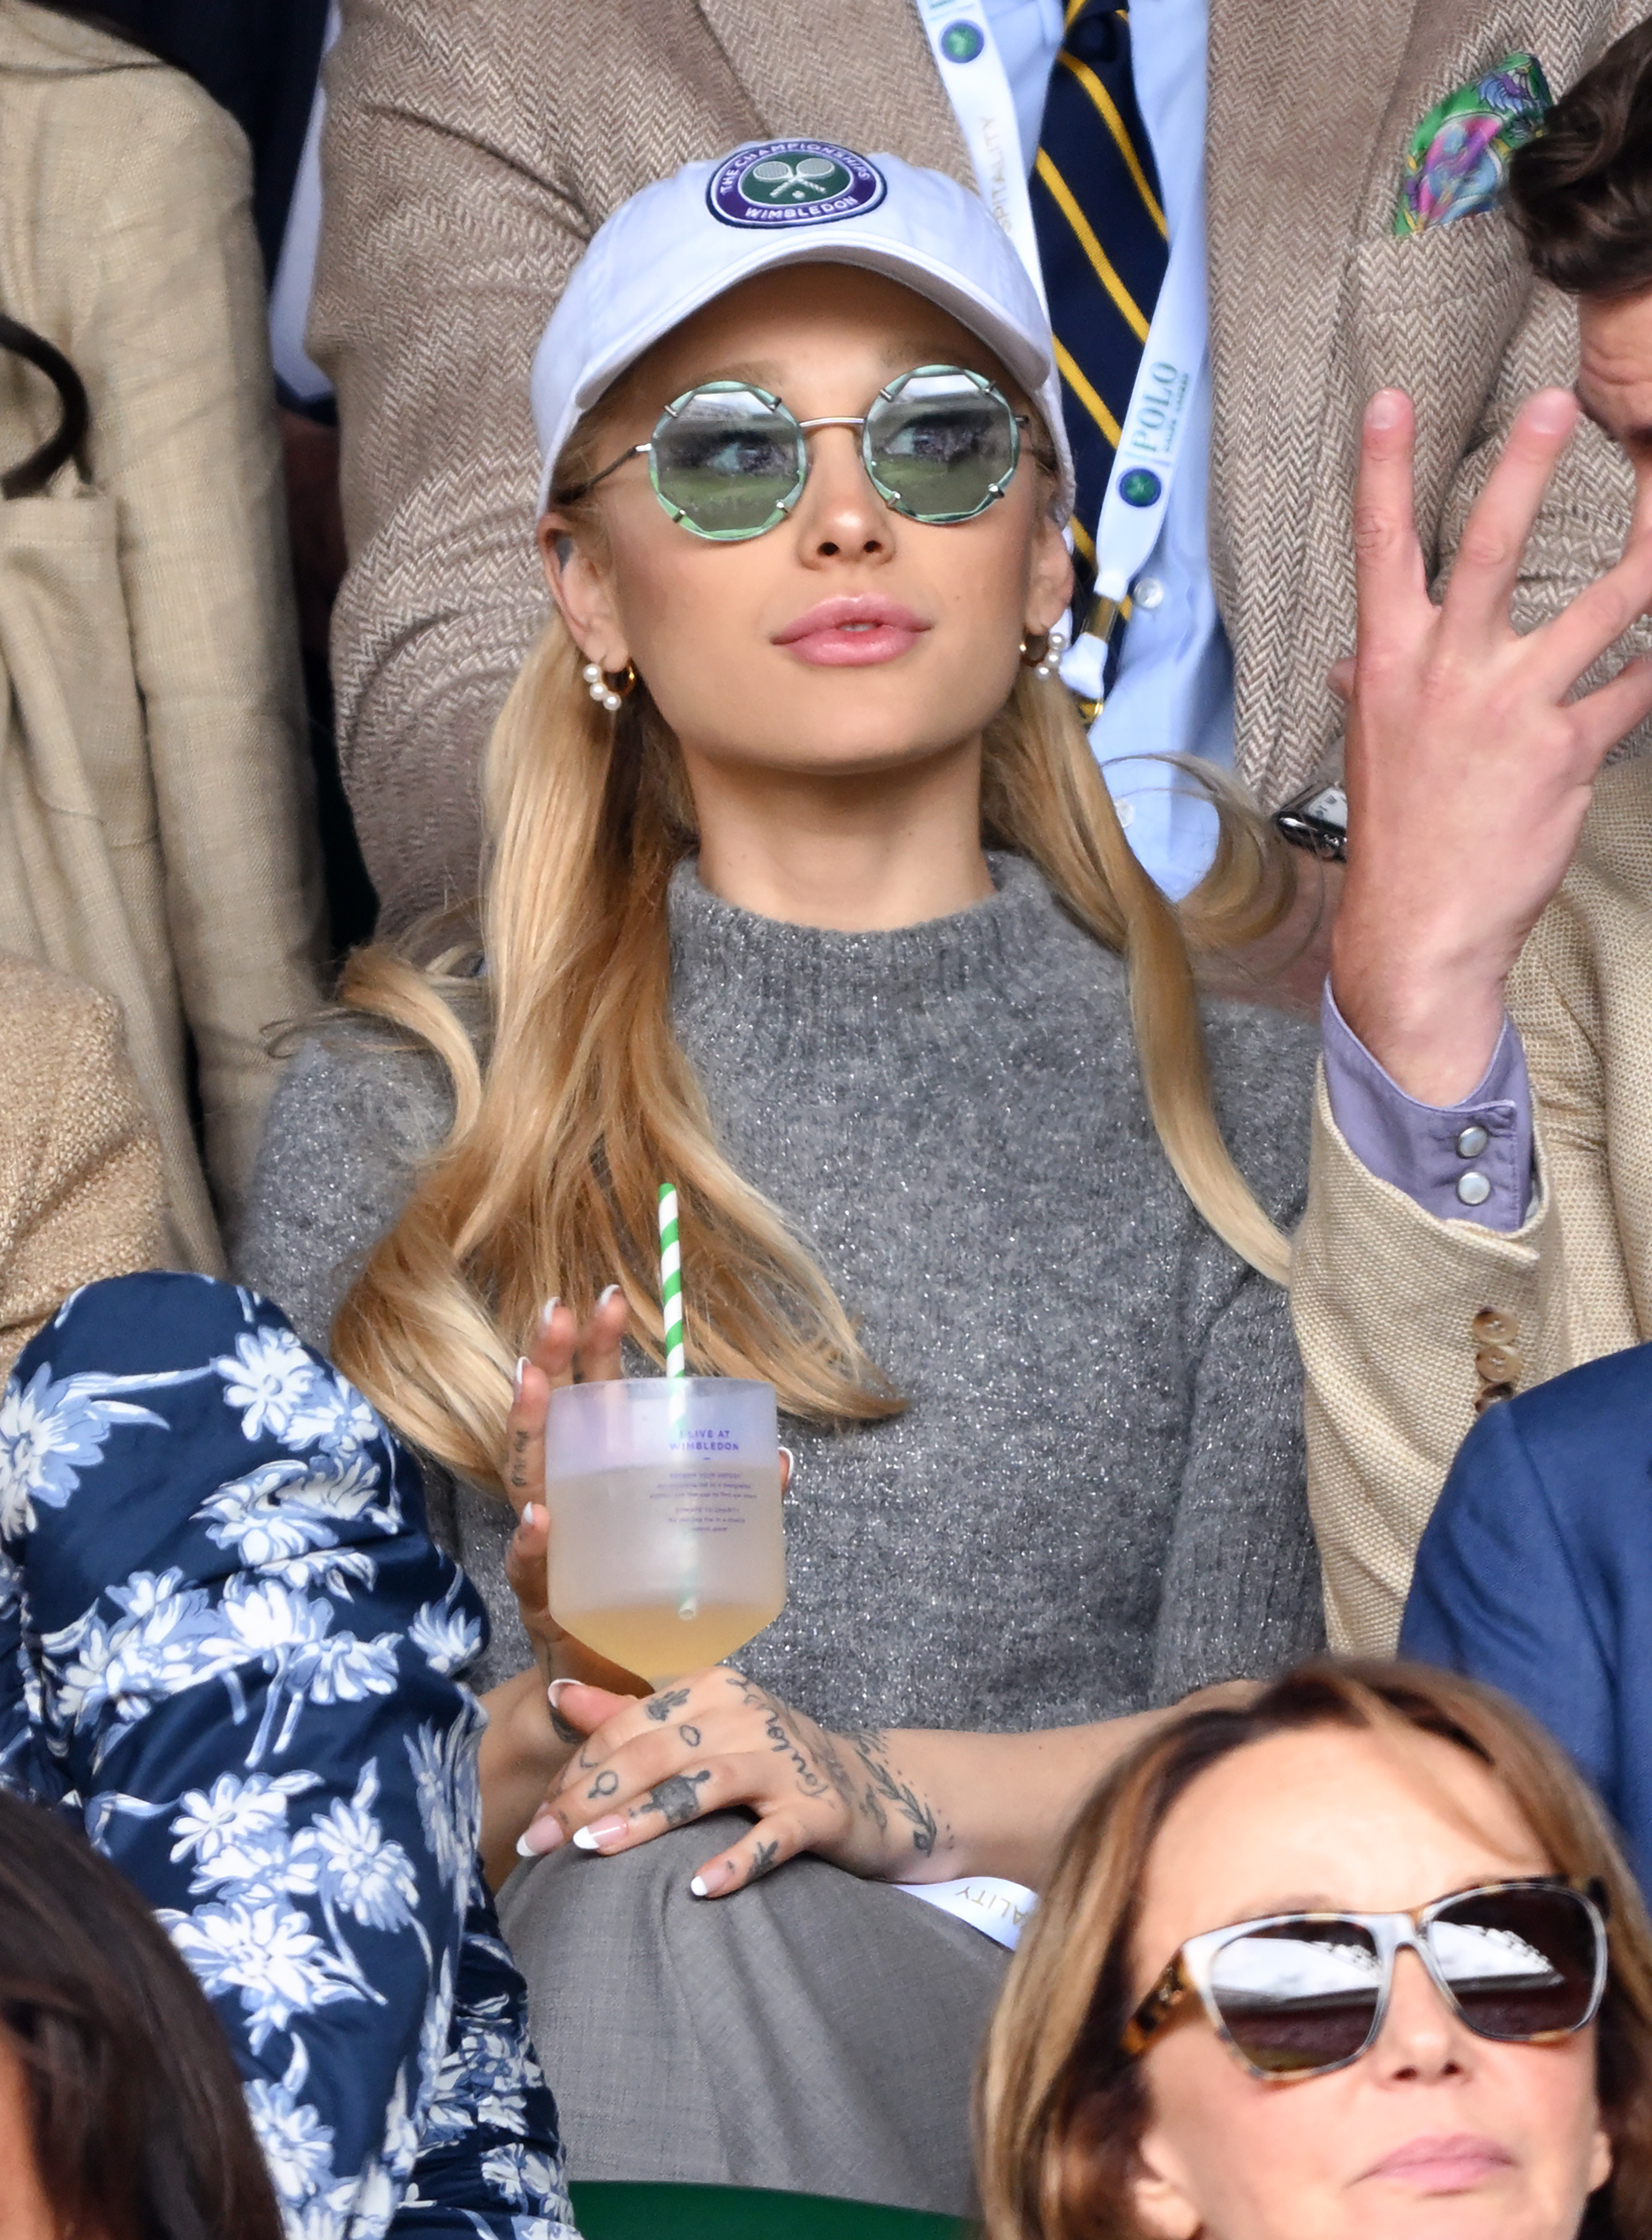 A closeup of ari in shades and a cap at a sporting event